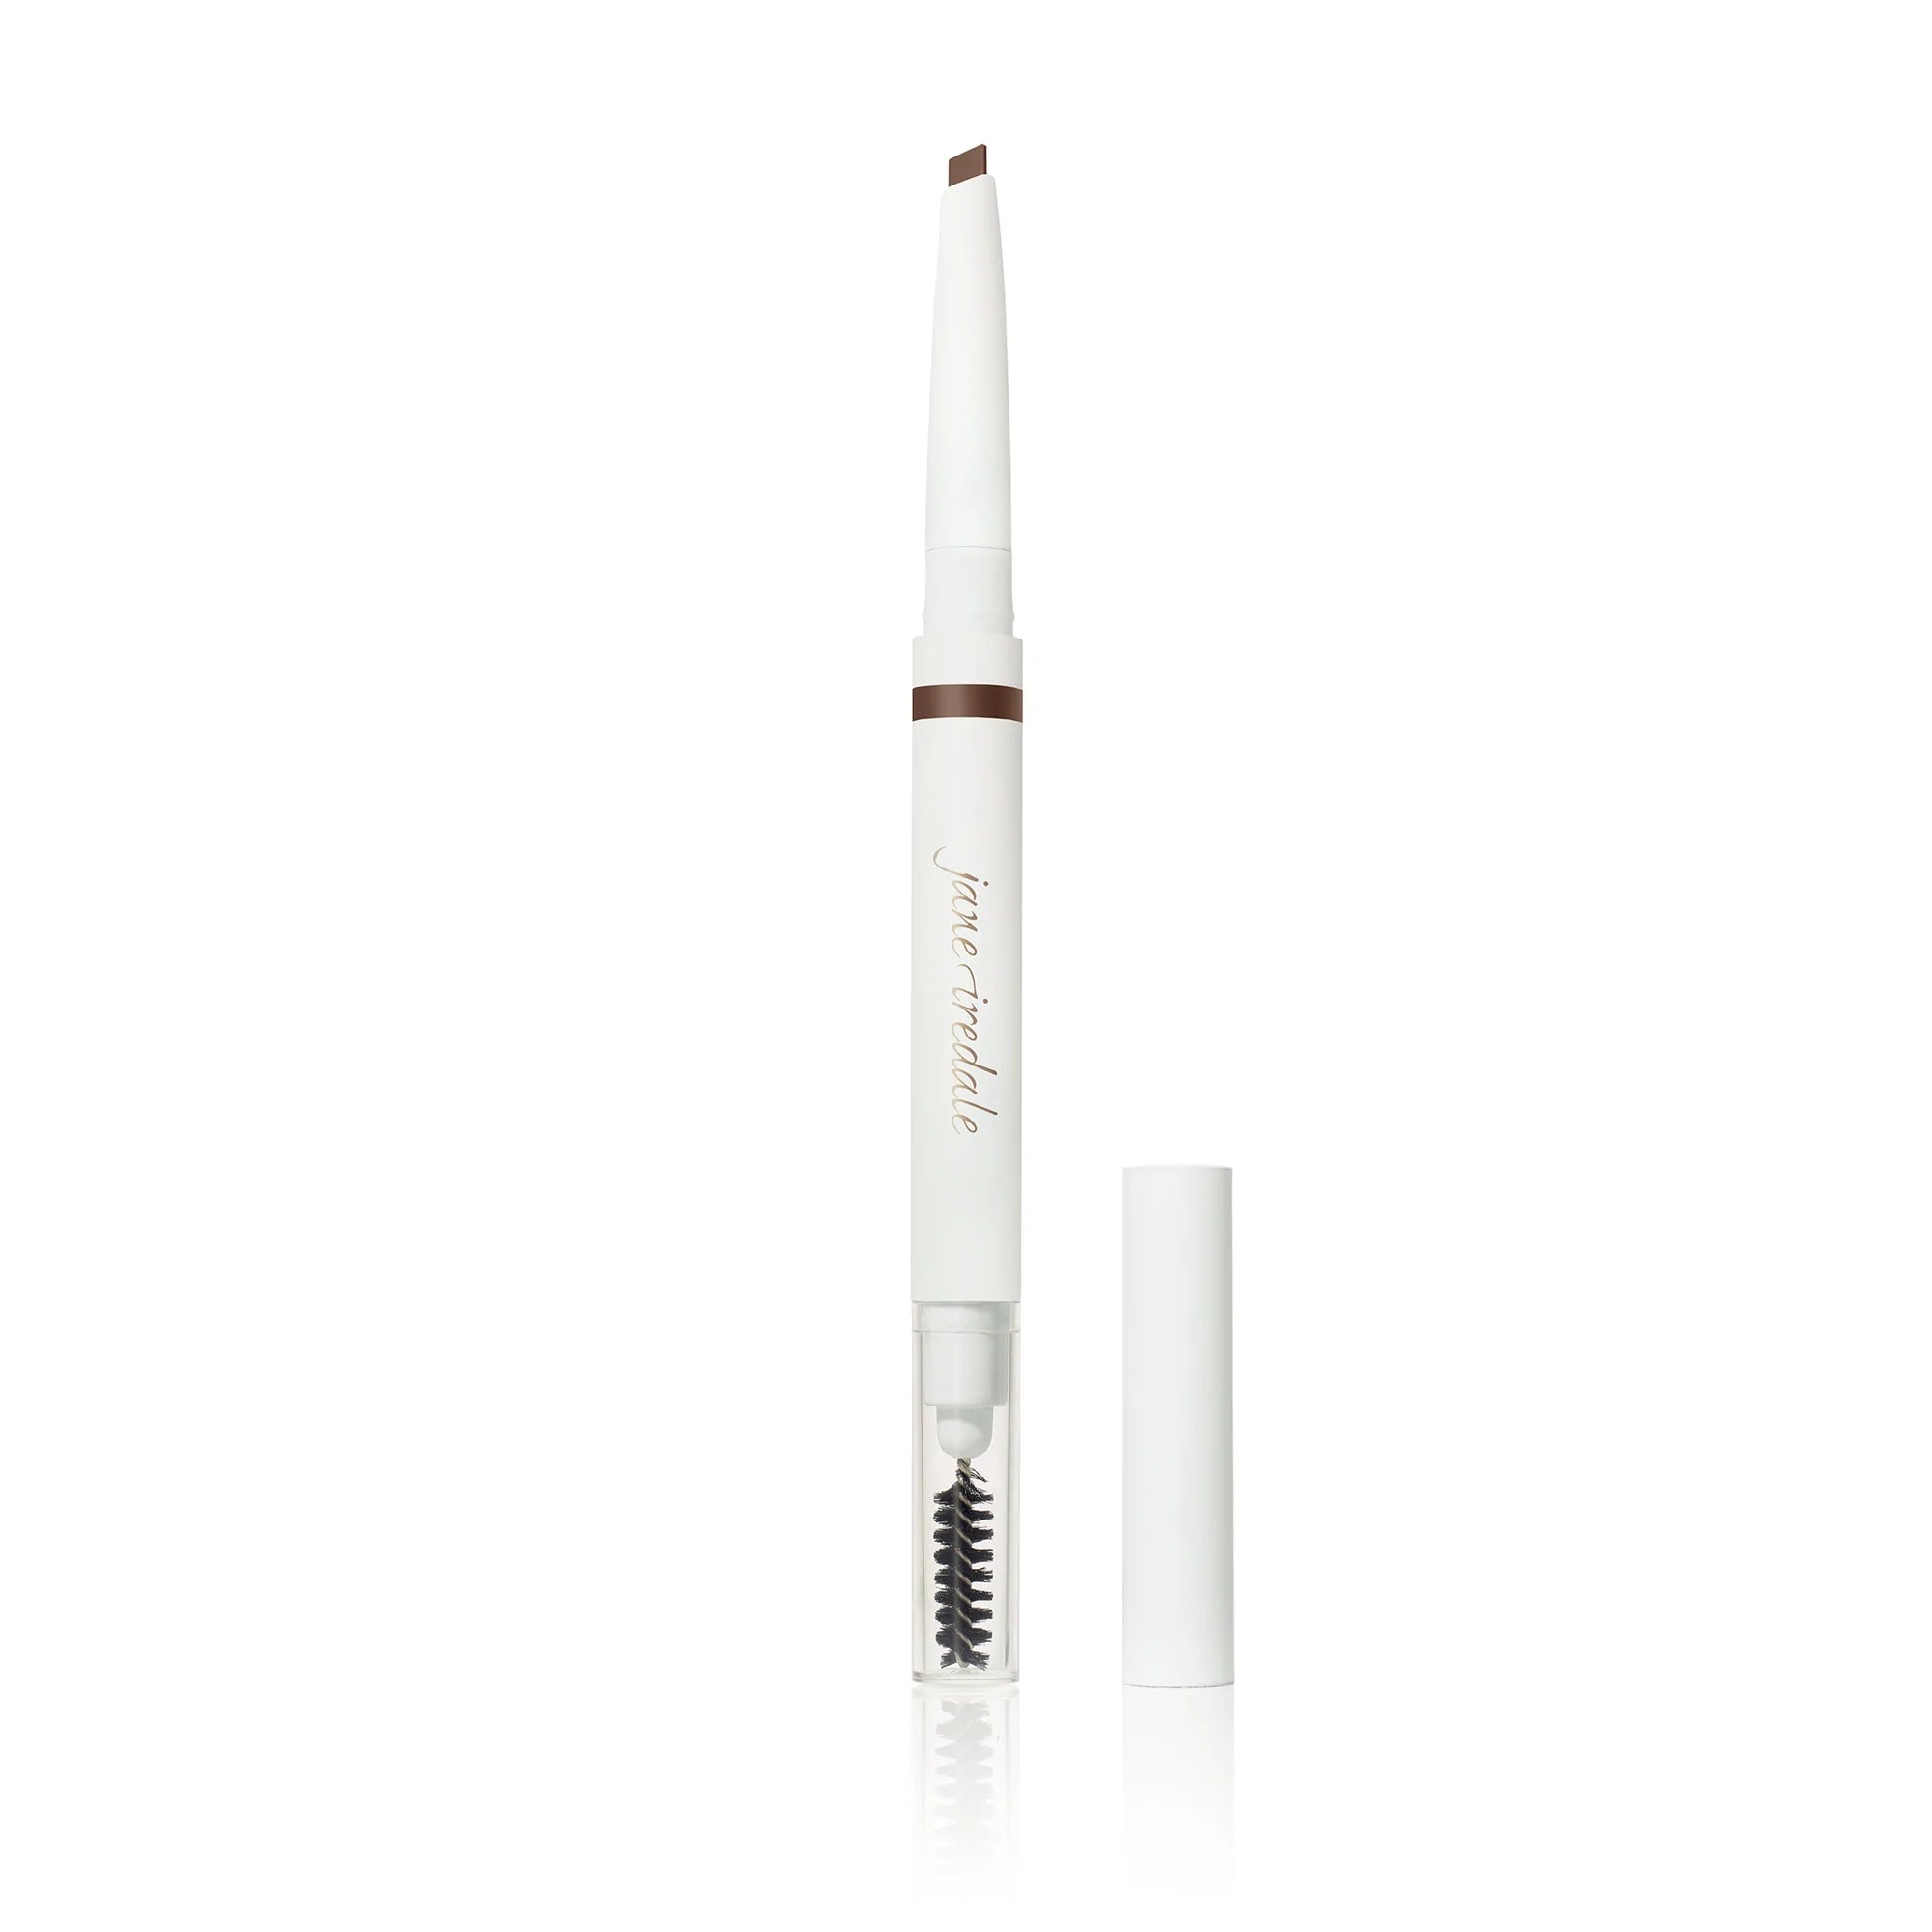 Jane Iredale Purebrow shaping pencil - www.Hudonline.no 